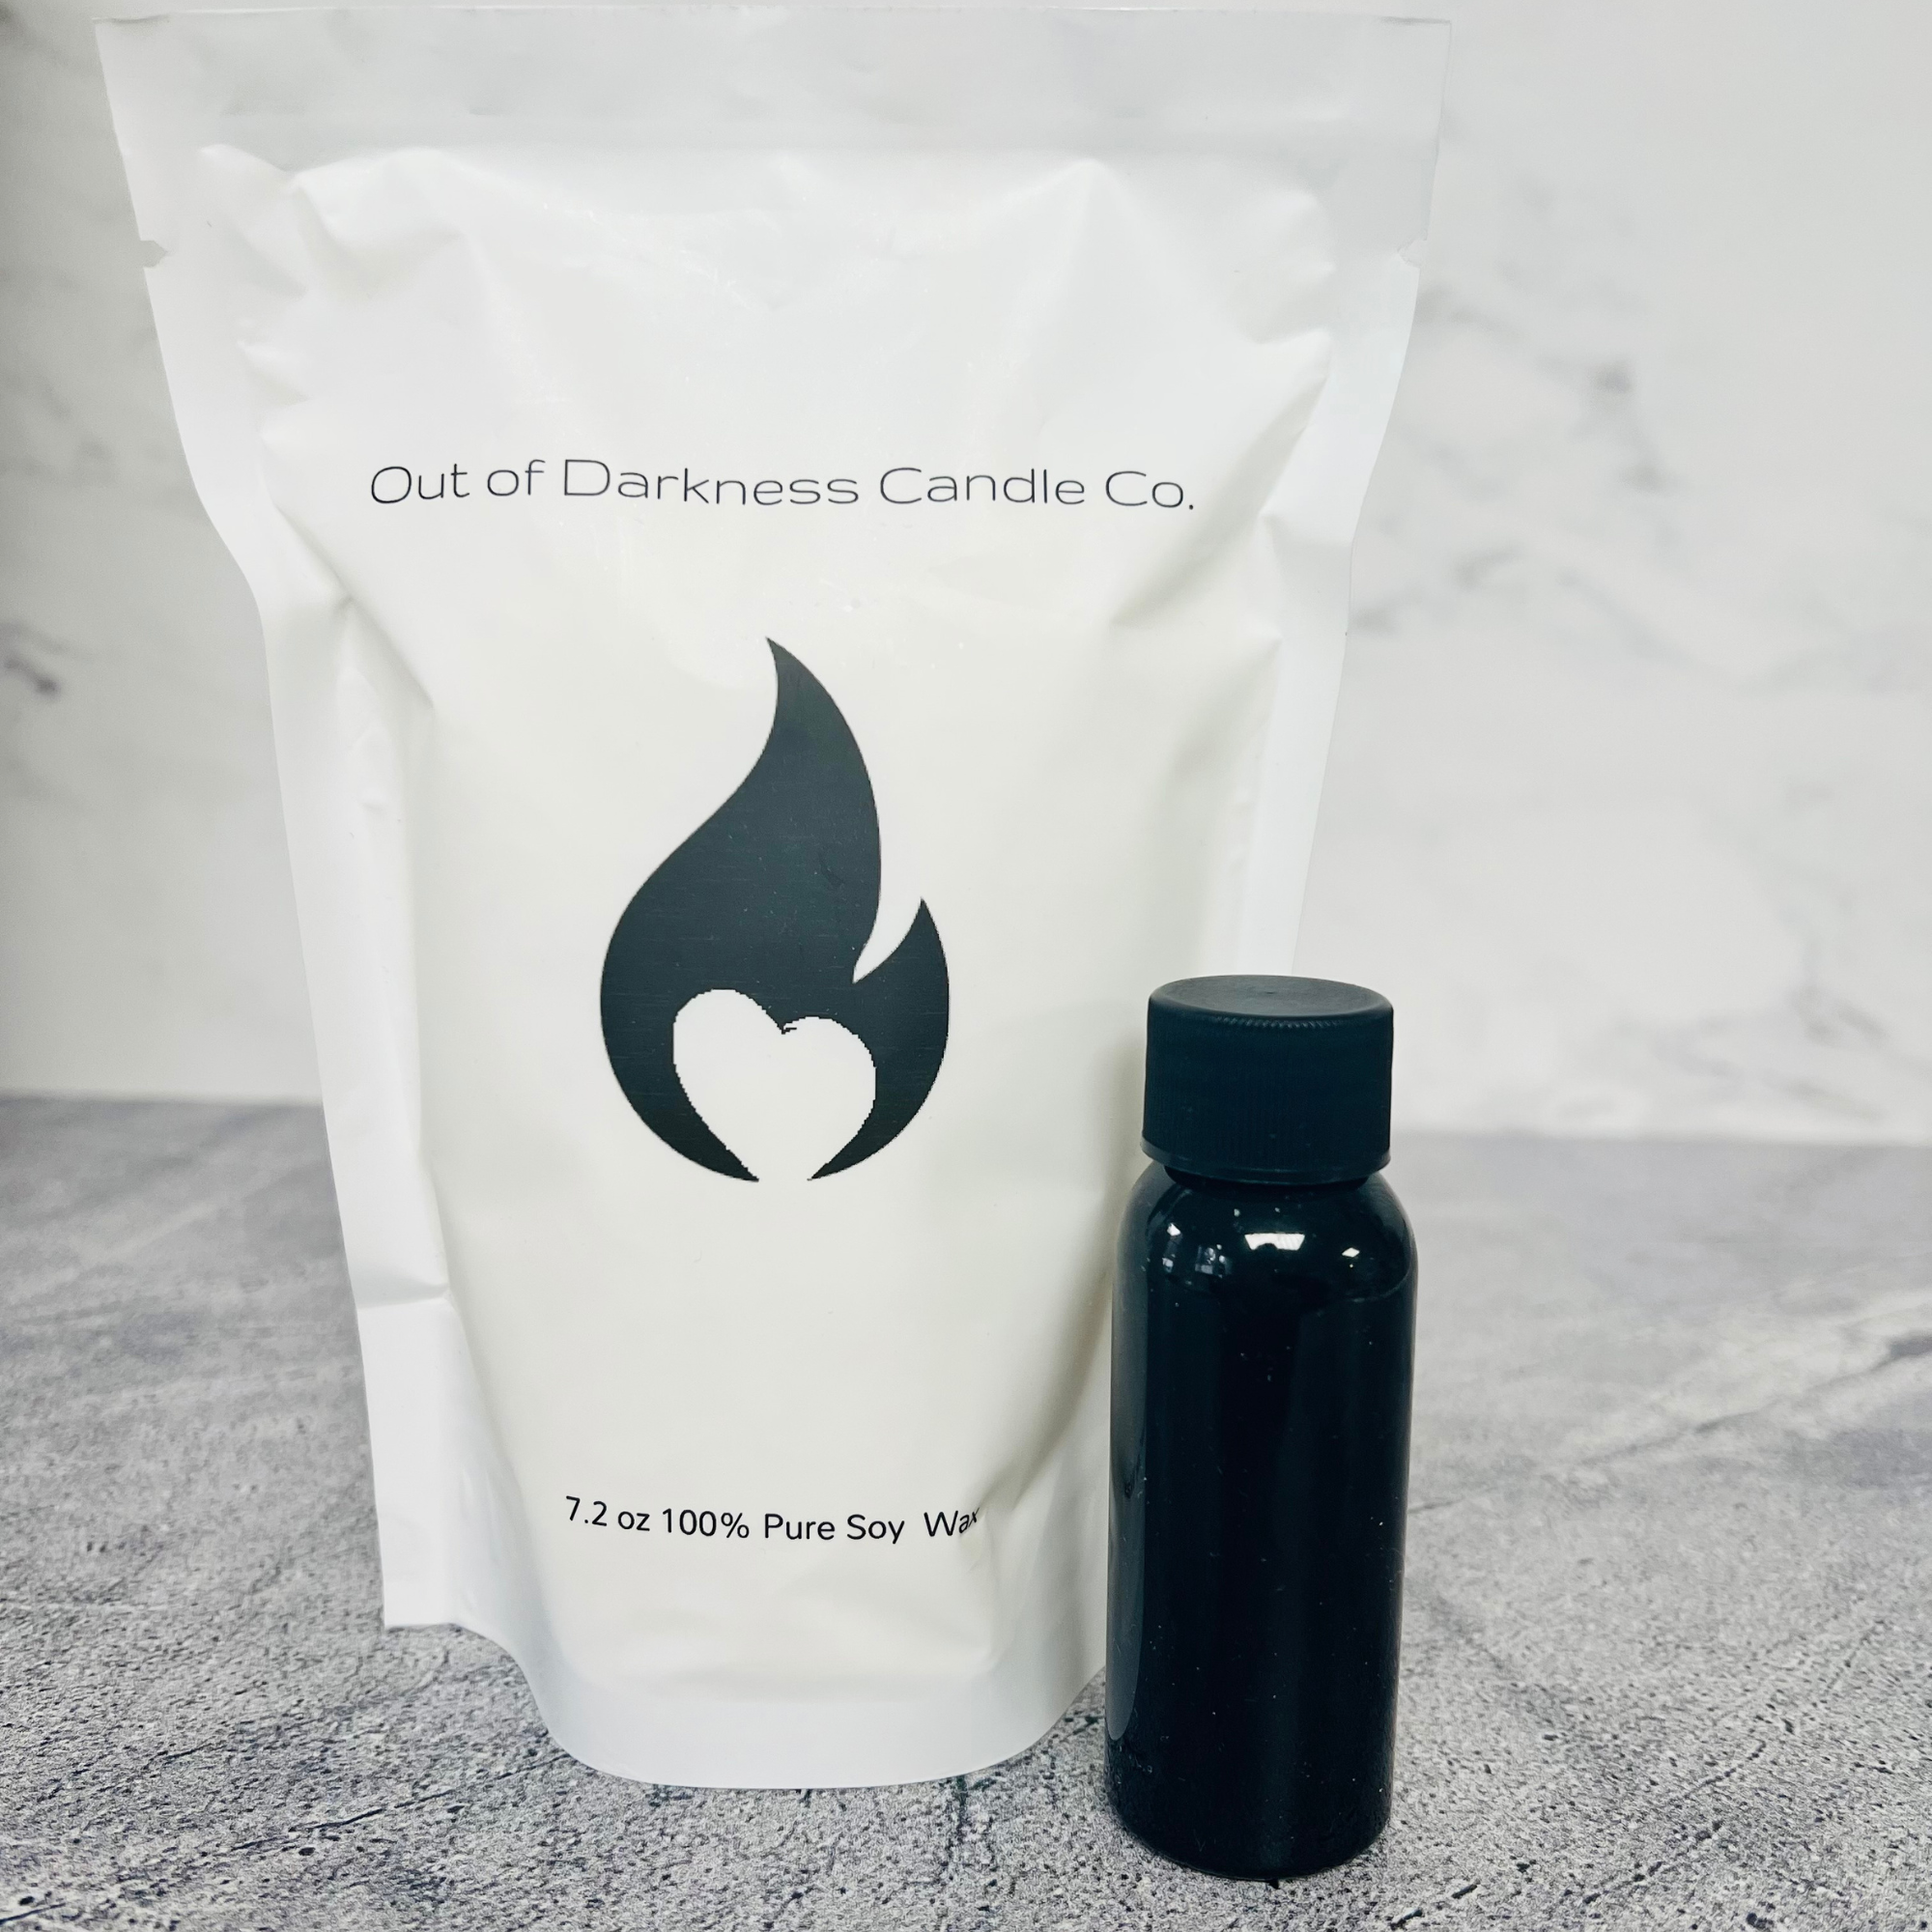 A white bag filled with soy wax and a black bottle next to it